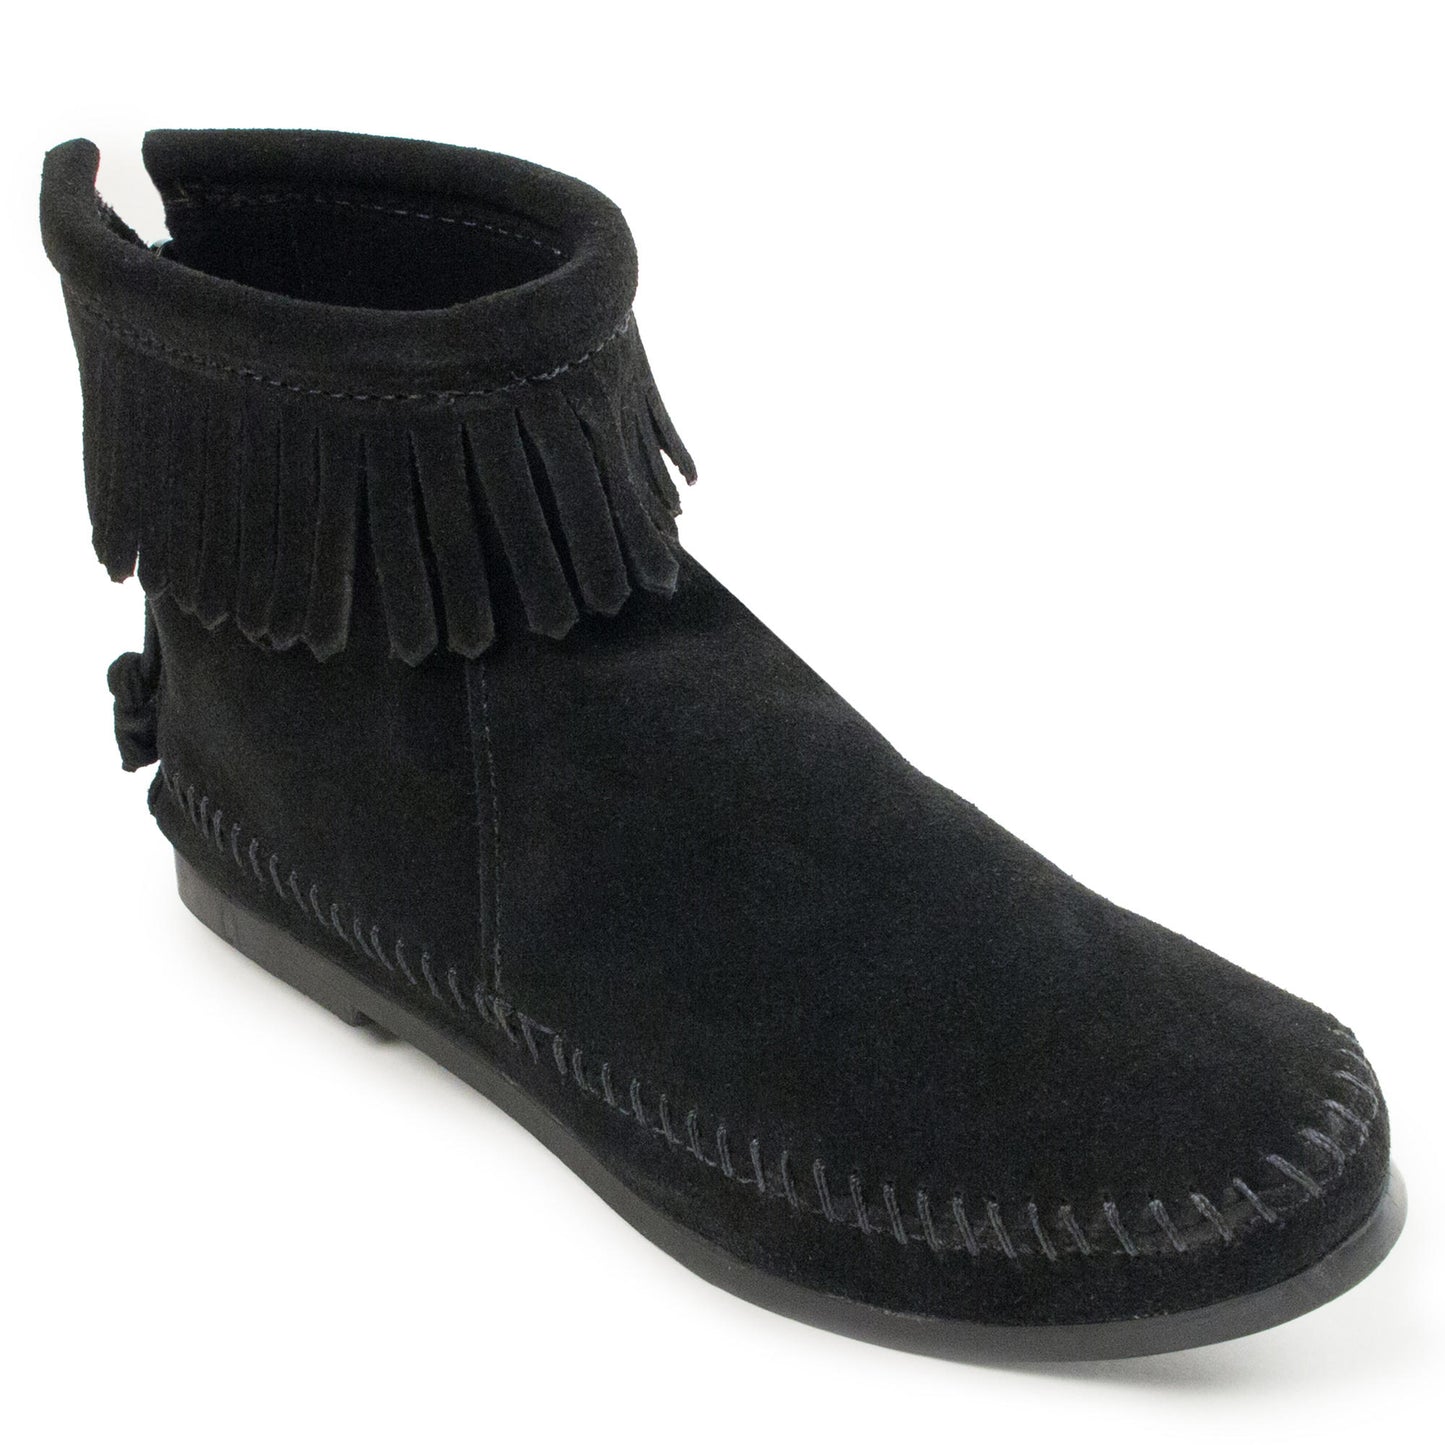 Minnetonka® Women's Black Fringed Hard Sole Suede Leather Ankle Boots